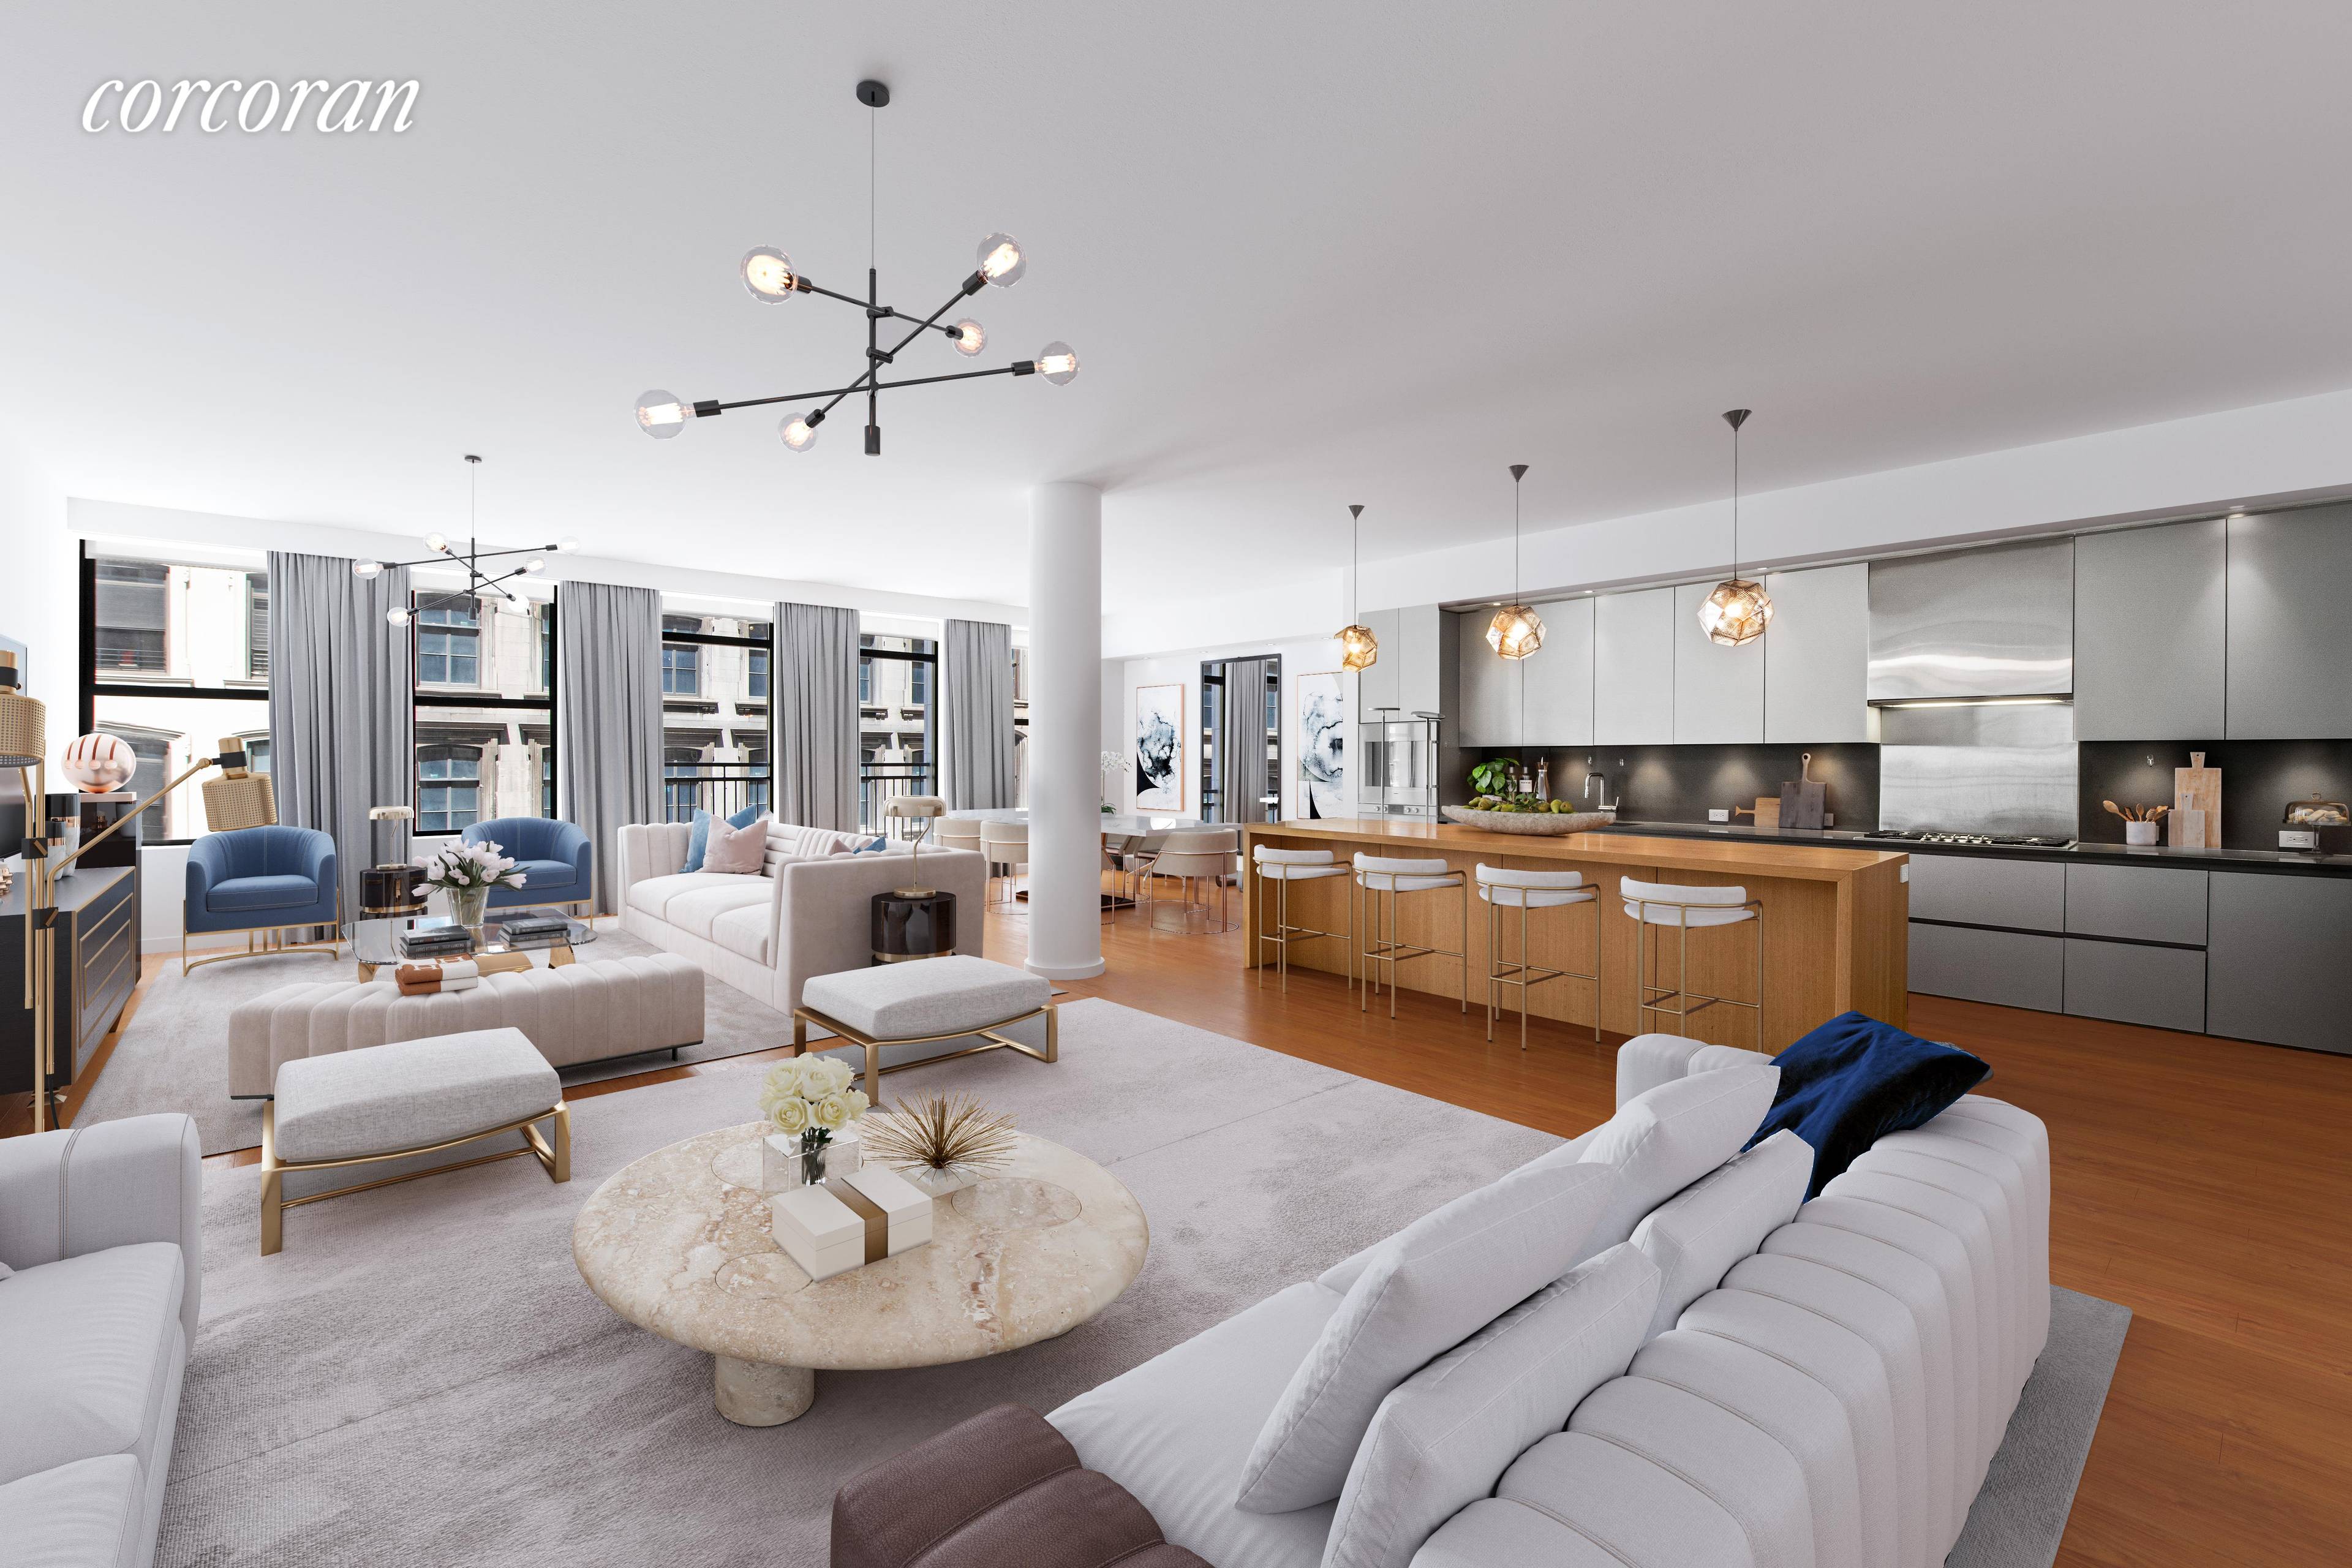 Own a rare Tribeca Loft with private landing and private self parking garage.